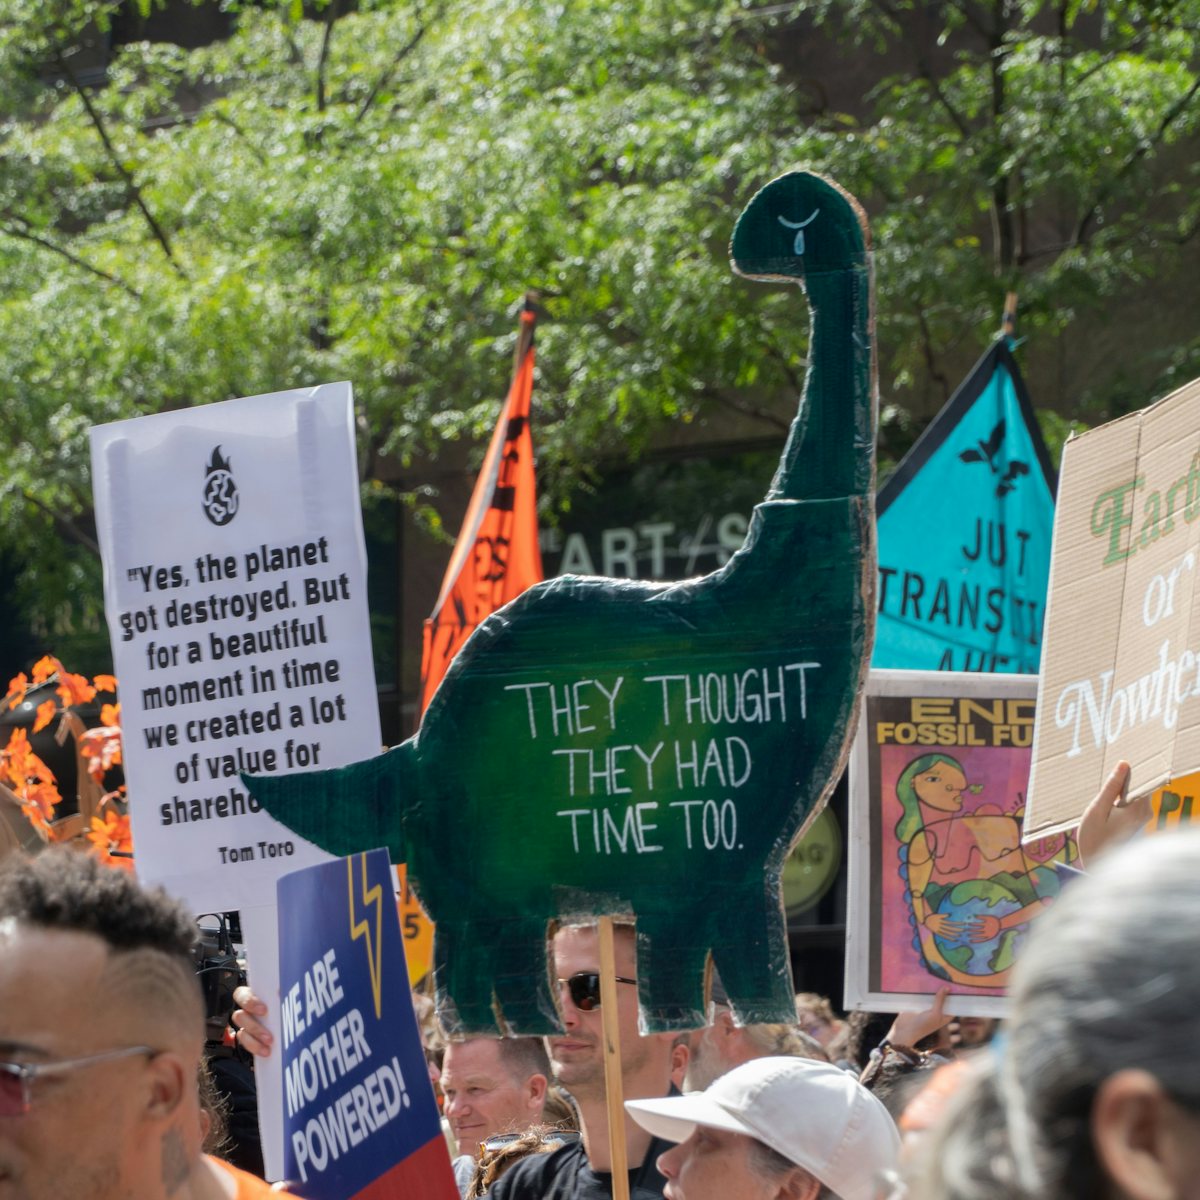 A sign shaped like a dinosaur reads "they thought they had time too."